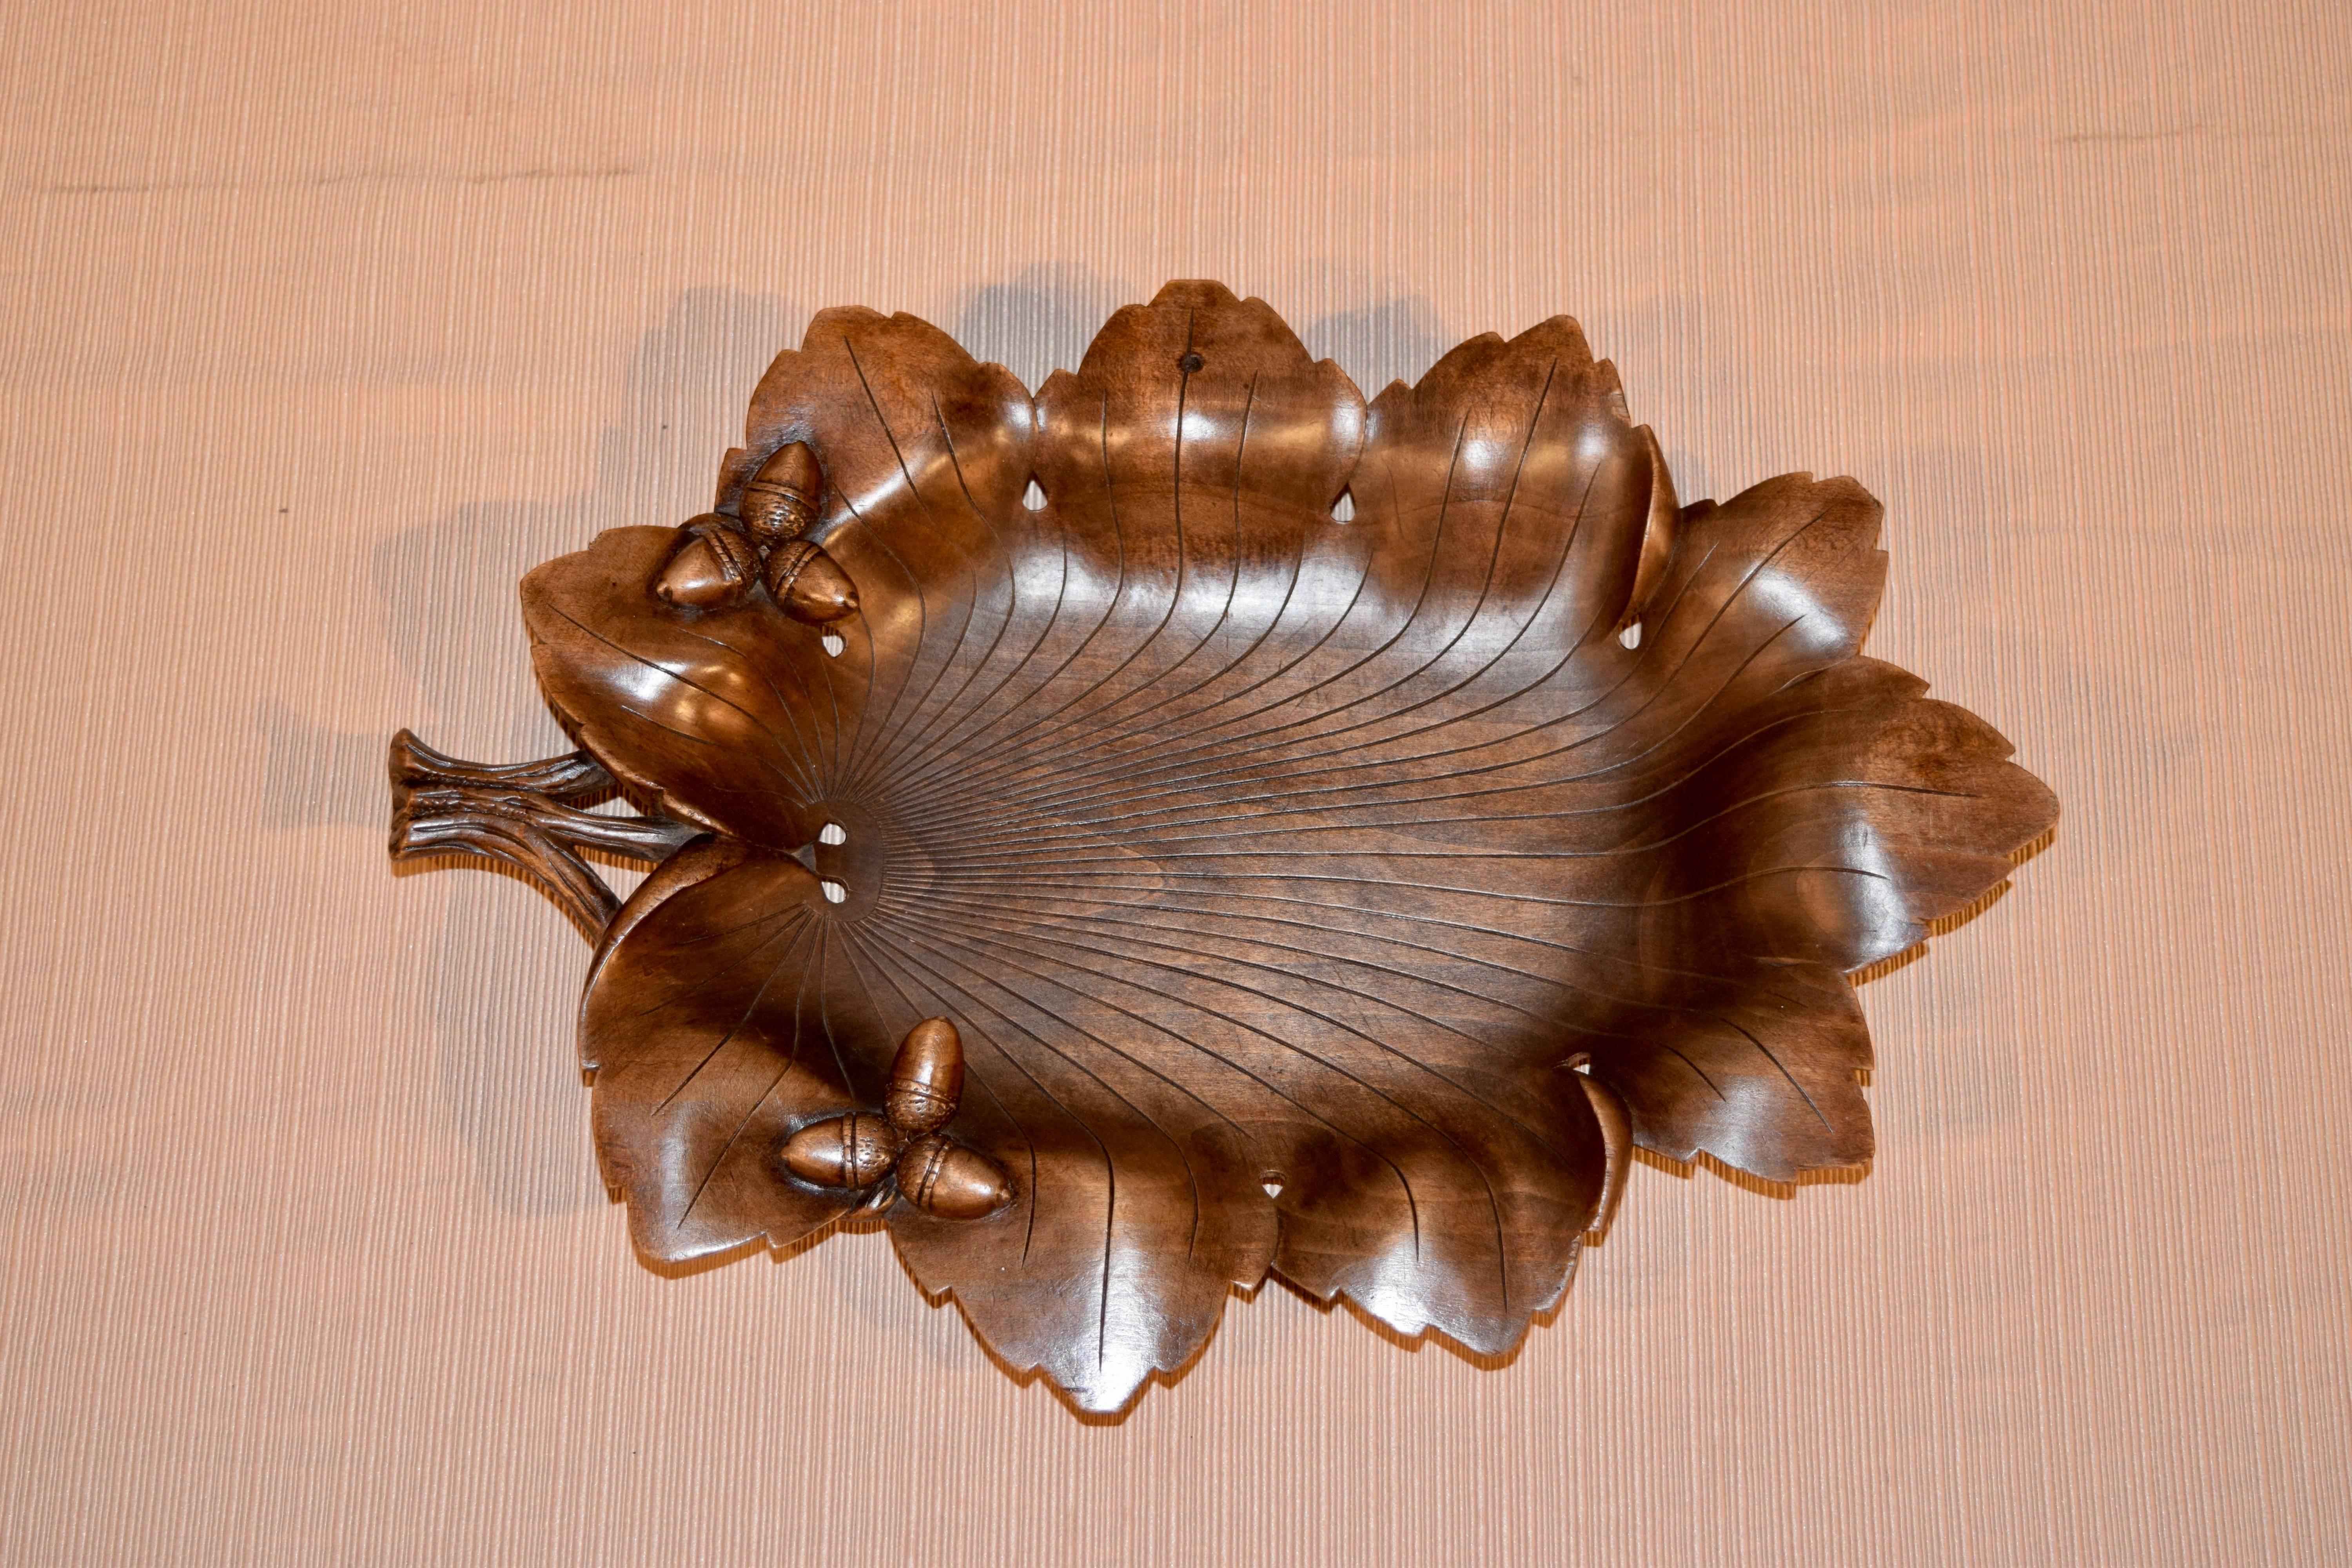 19th century black forest hand-carved tray from Switzerland, made from fruitwood.